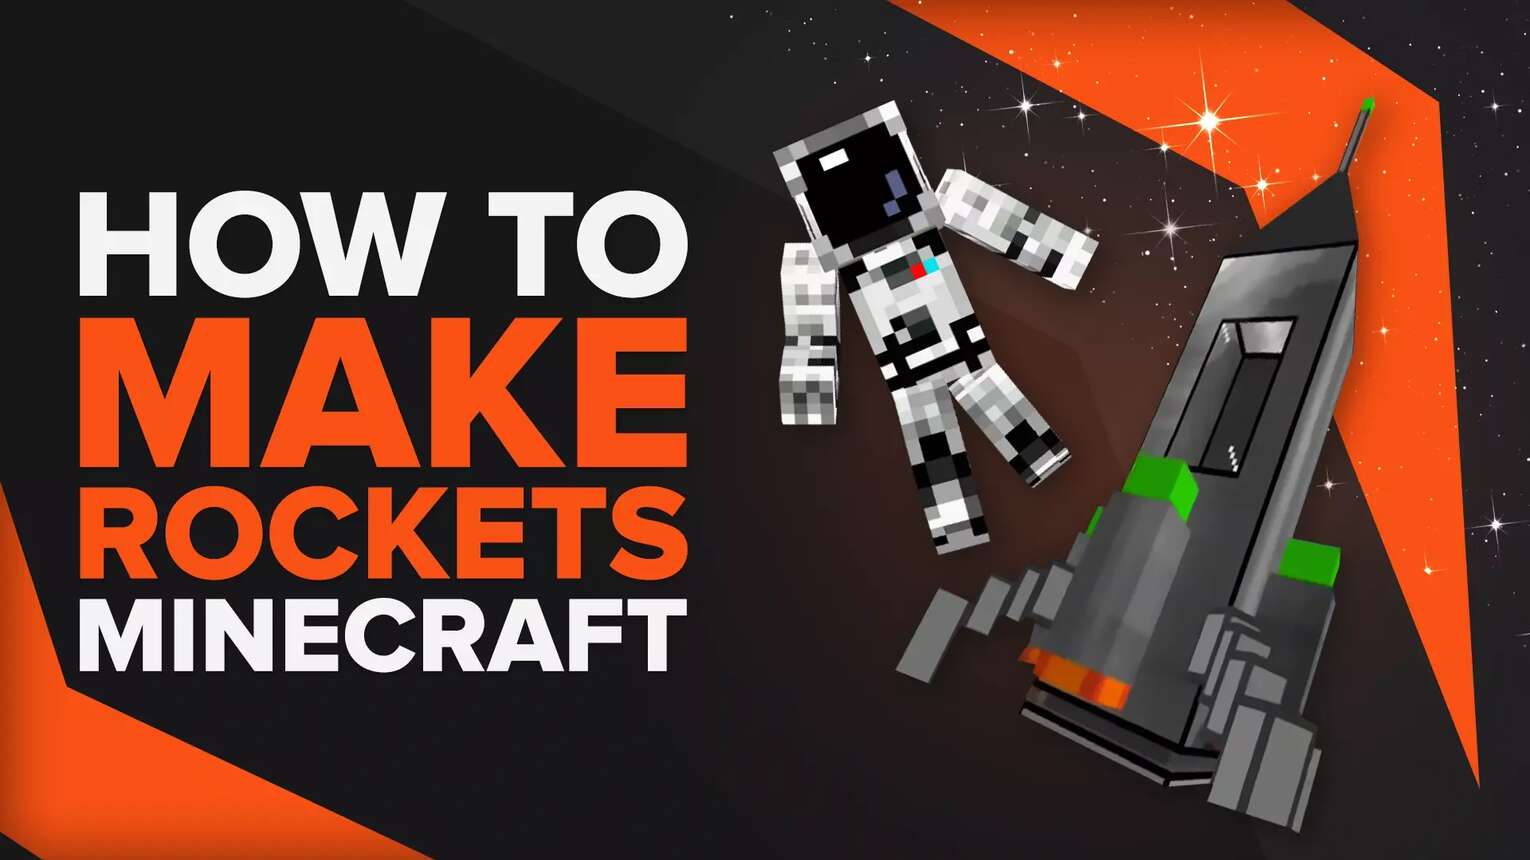 Here's How to Easily Make Rocket Ships in Minecraft